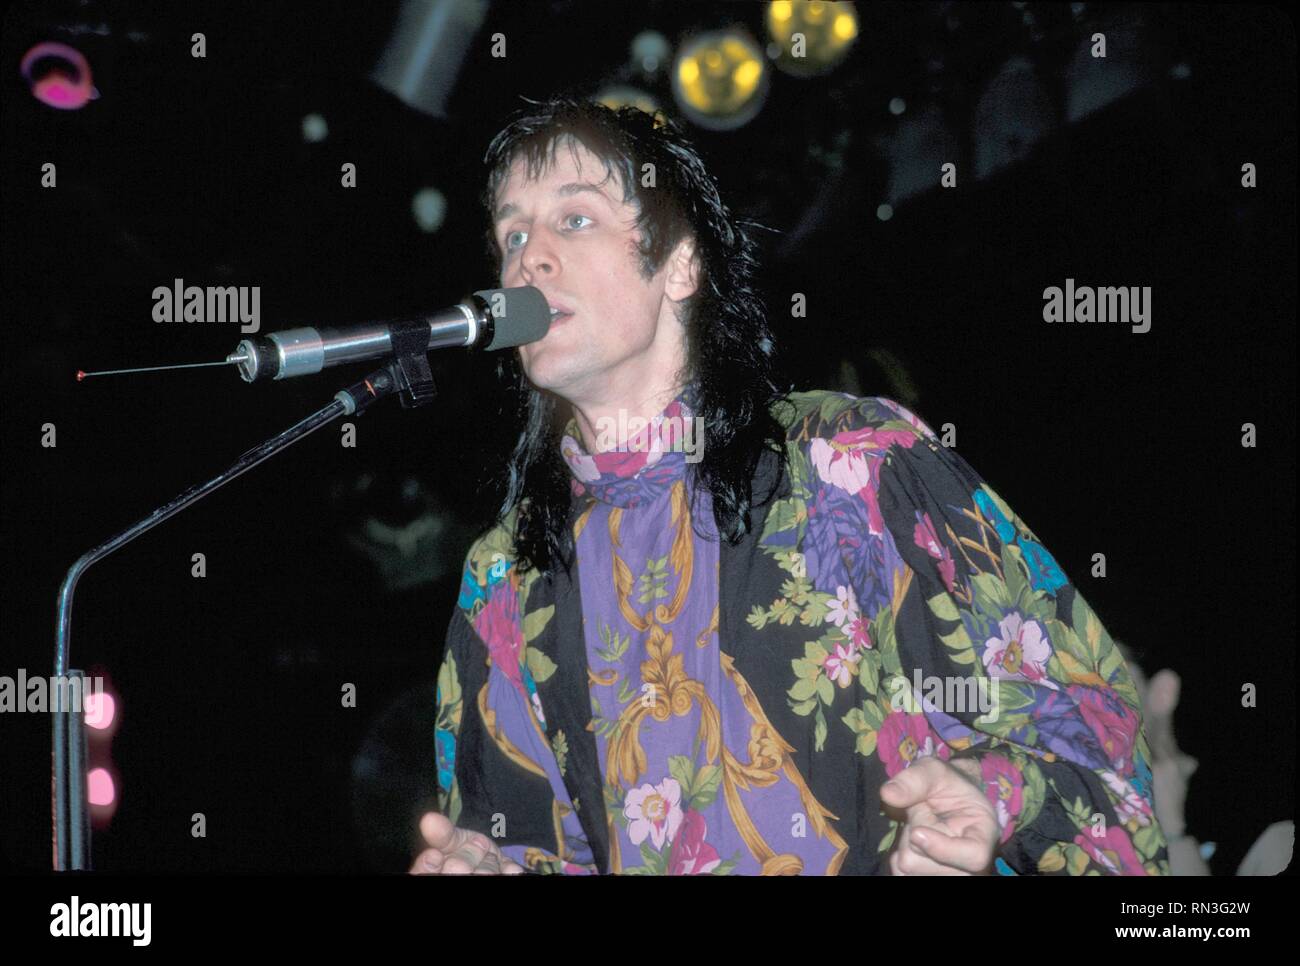 Musician, singer, songwriter and record producer Todd Rundgren is shown performing on stage during a 'live' concert appearance. Stock Photo